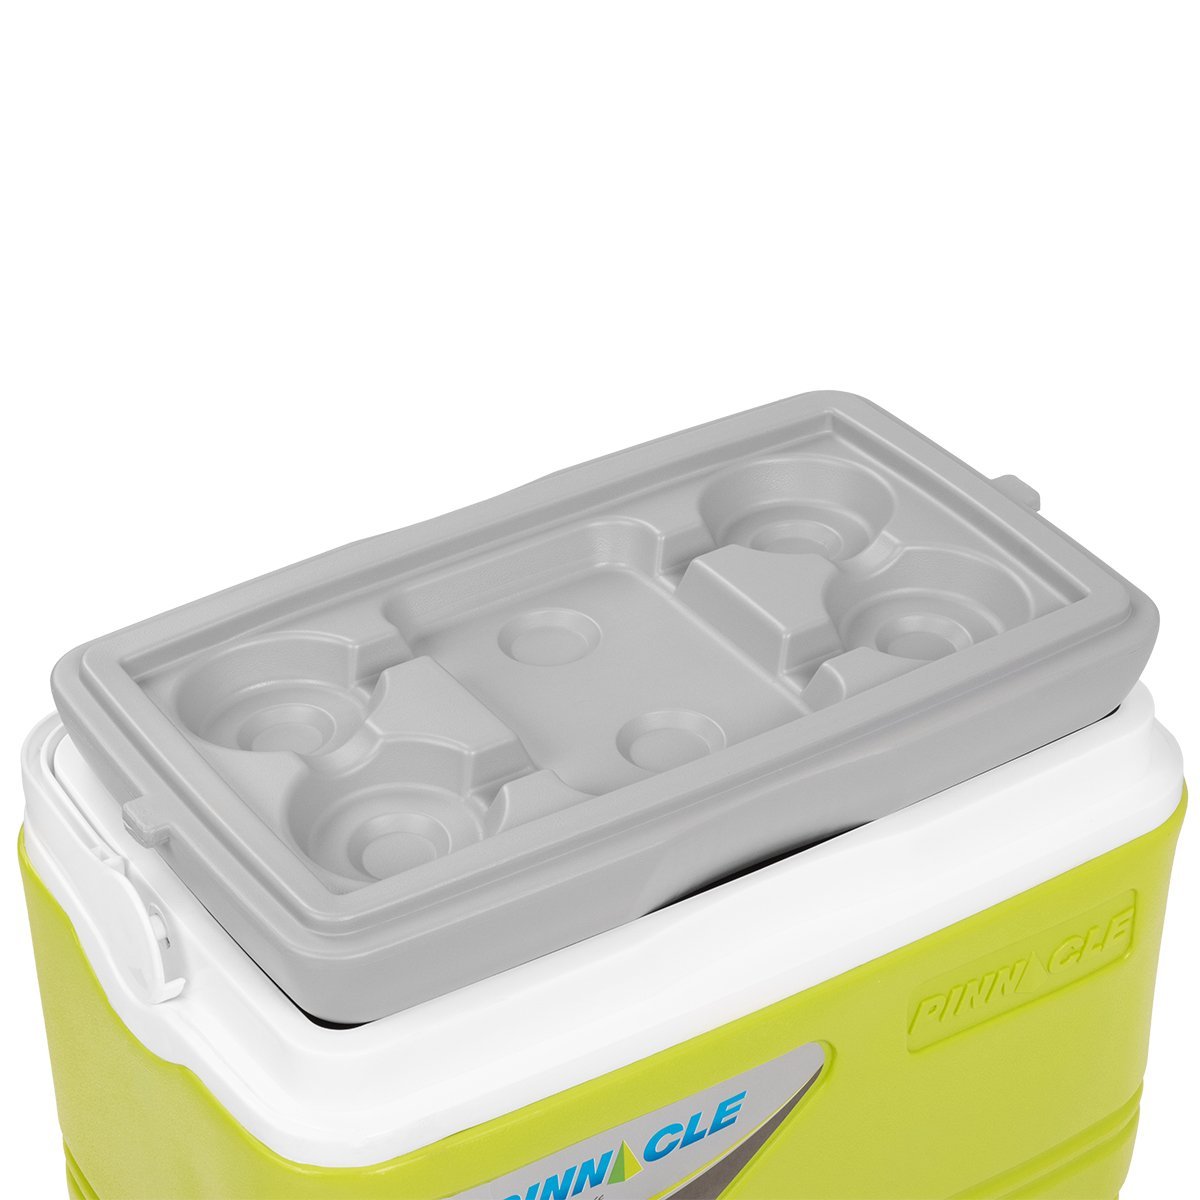 Primero Portable Camping Ice Chest with Lid Cup Holders, 33 qt, green color